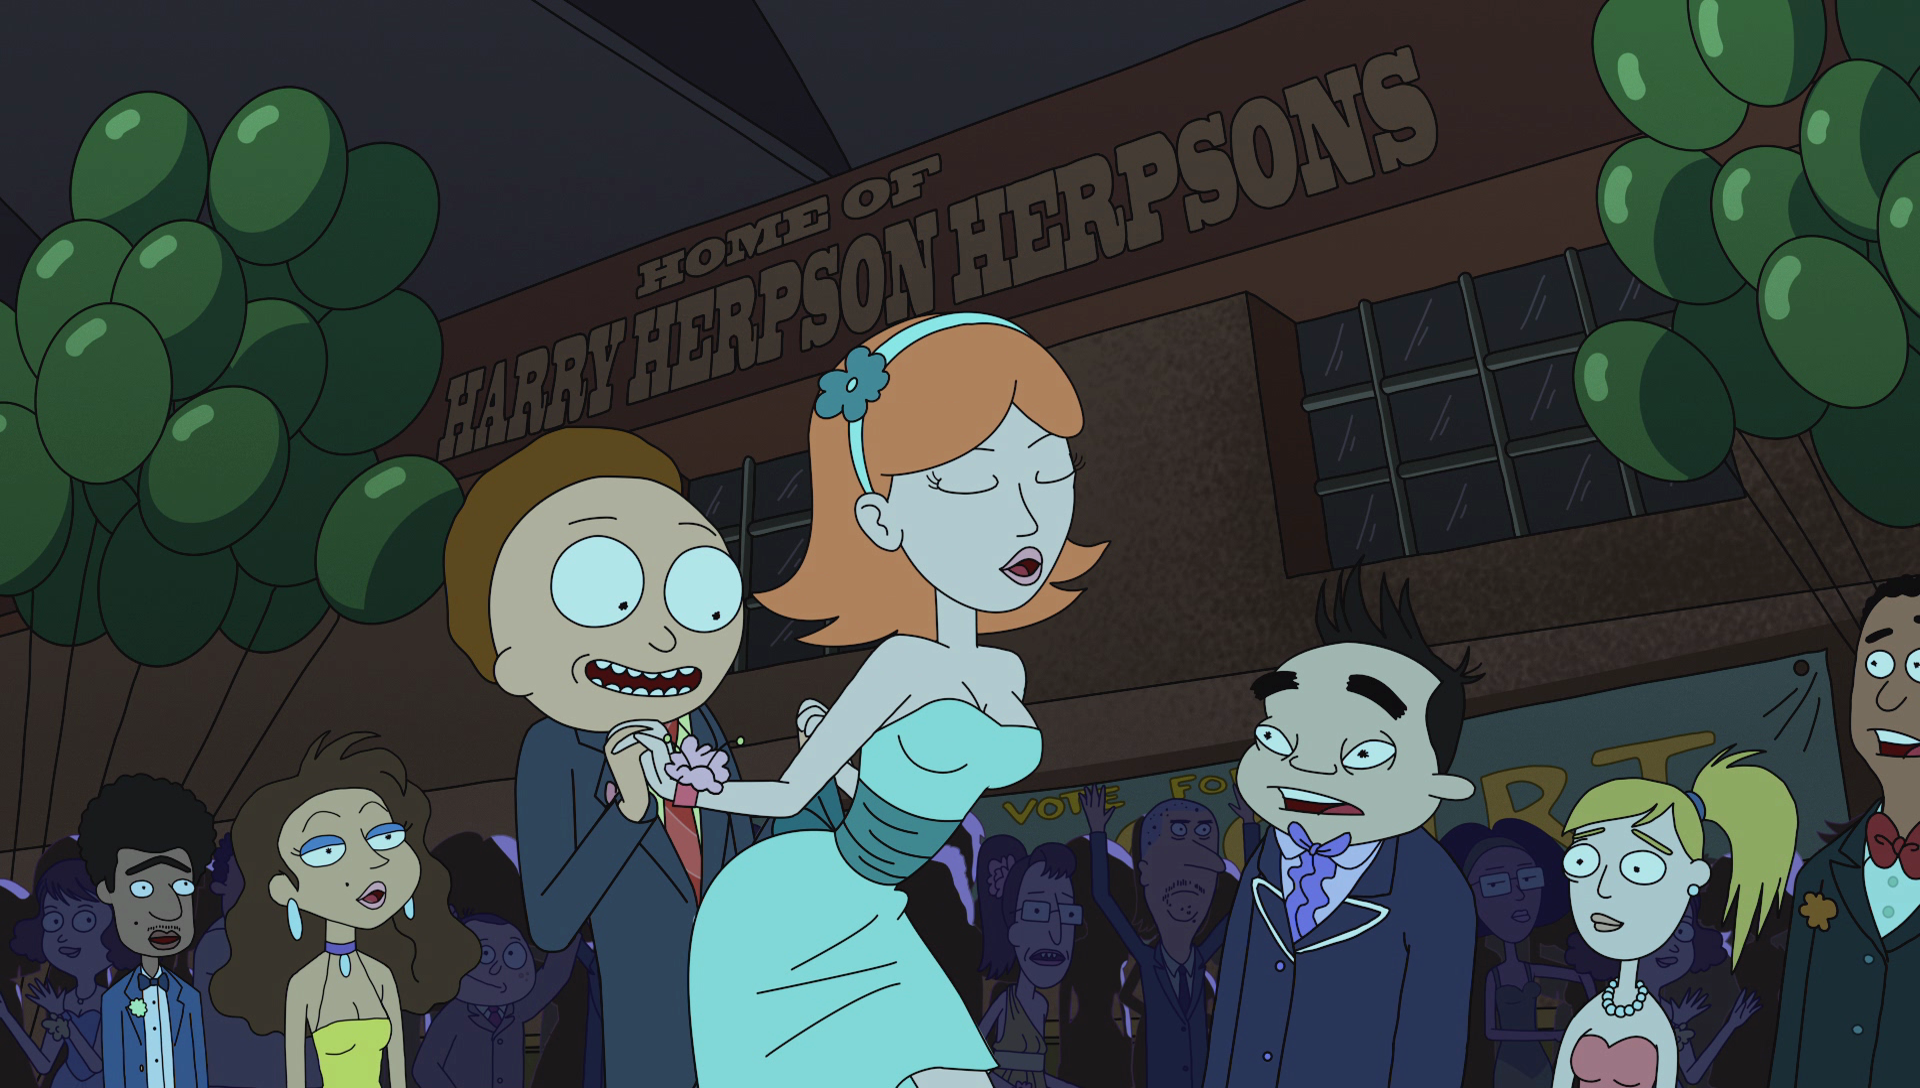 Image S1e6 Teenage Dancingpng Rick And Morty Wiki Fandom Powered By Wikia 2715